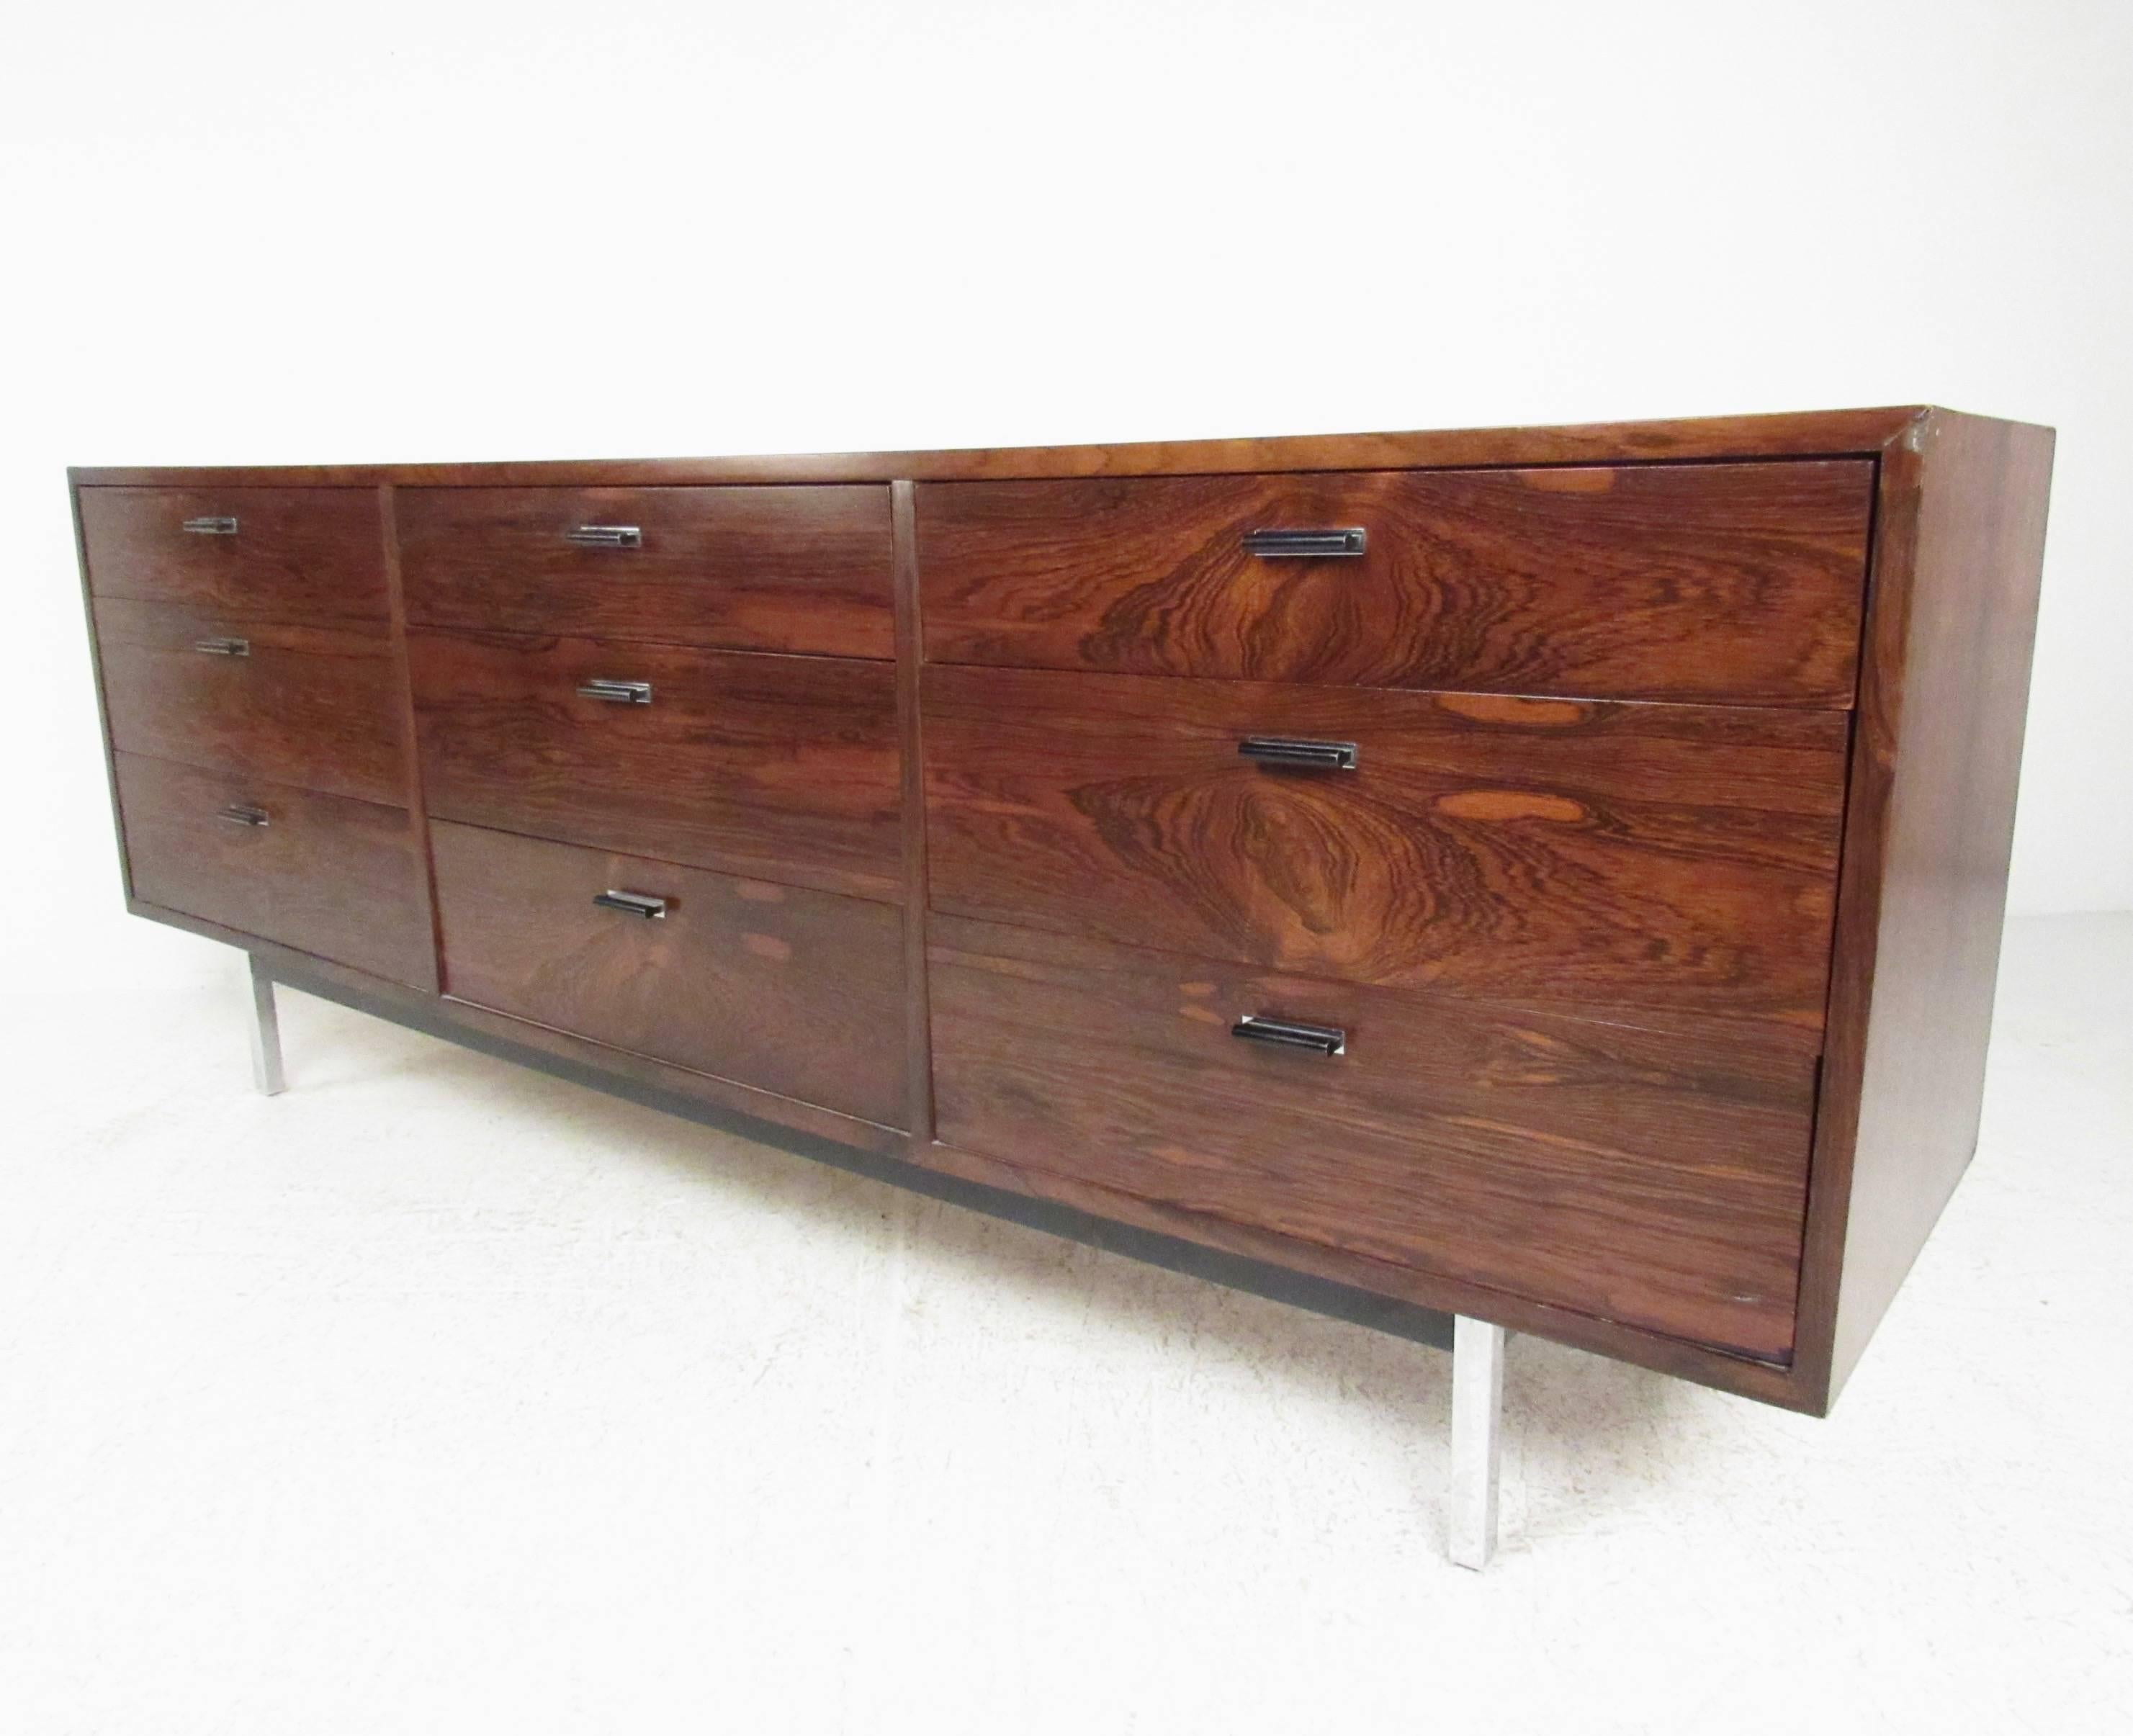 This stylish Mid-Century dresser by Founders features a beautiful Rosewood finish, graduated drawers, and unique metal drawer pulls. Wonderful mix of modern style and plenty of storage space make this vintage nine drawer dresser by Founders